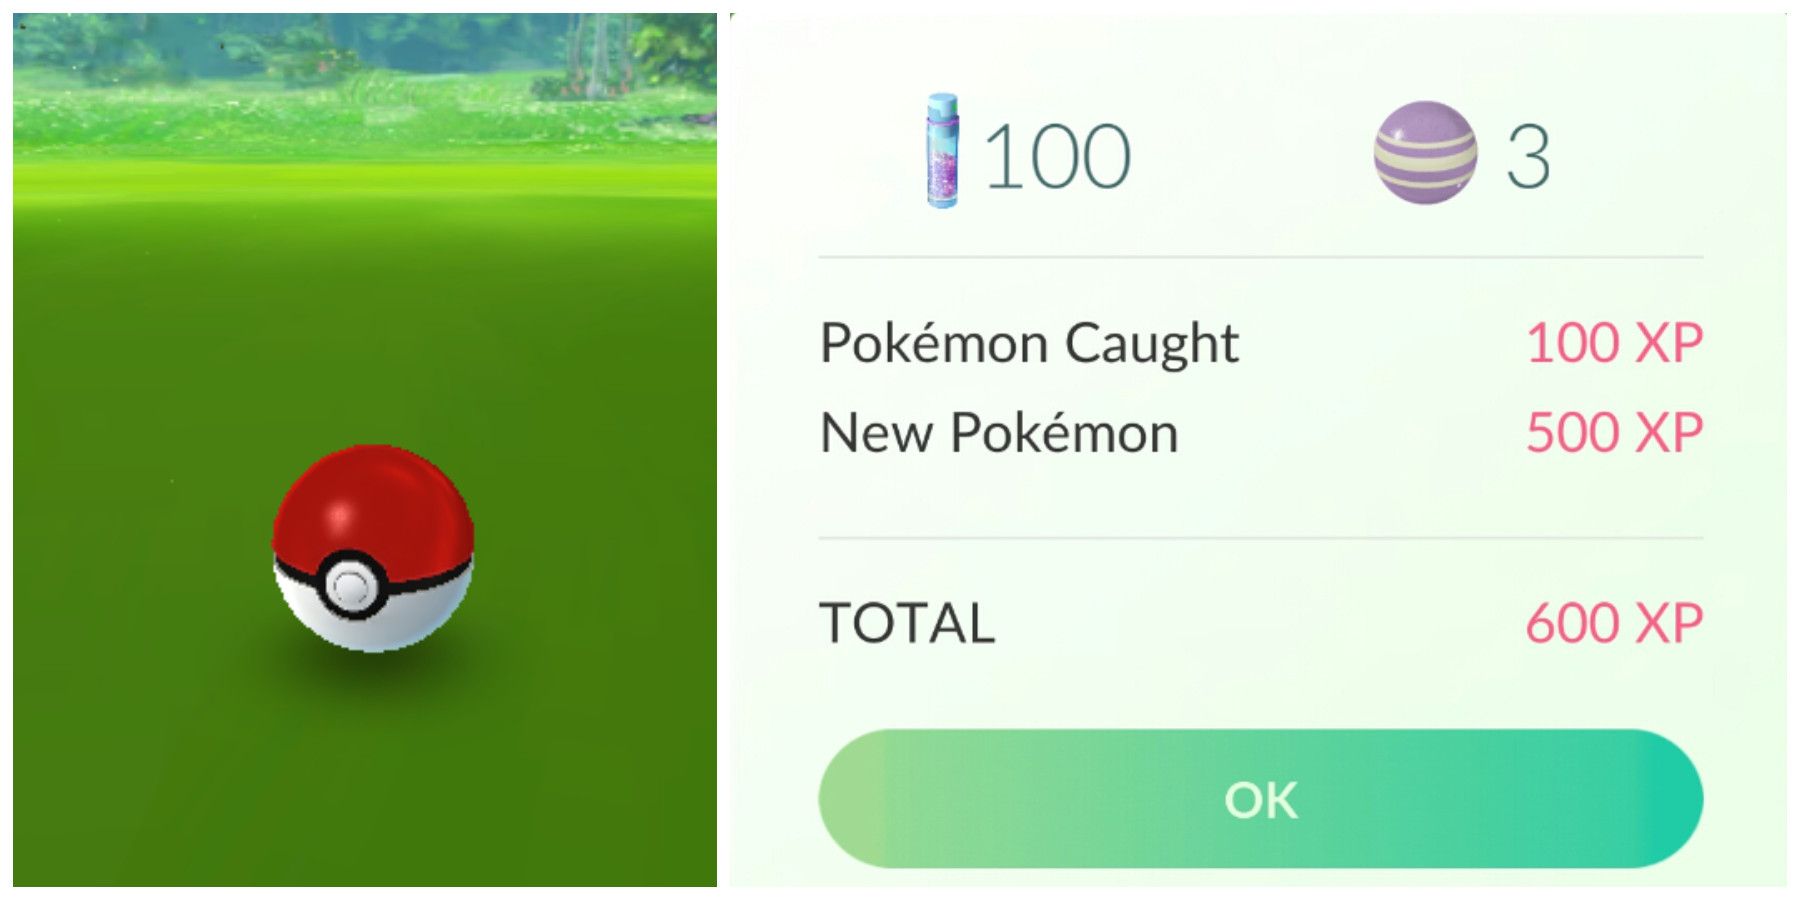 Pokemon GO: A Guide To Earning XP